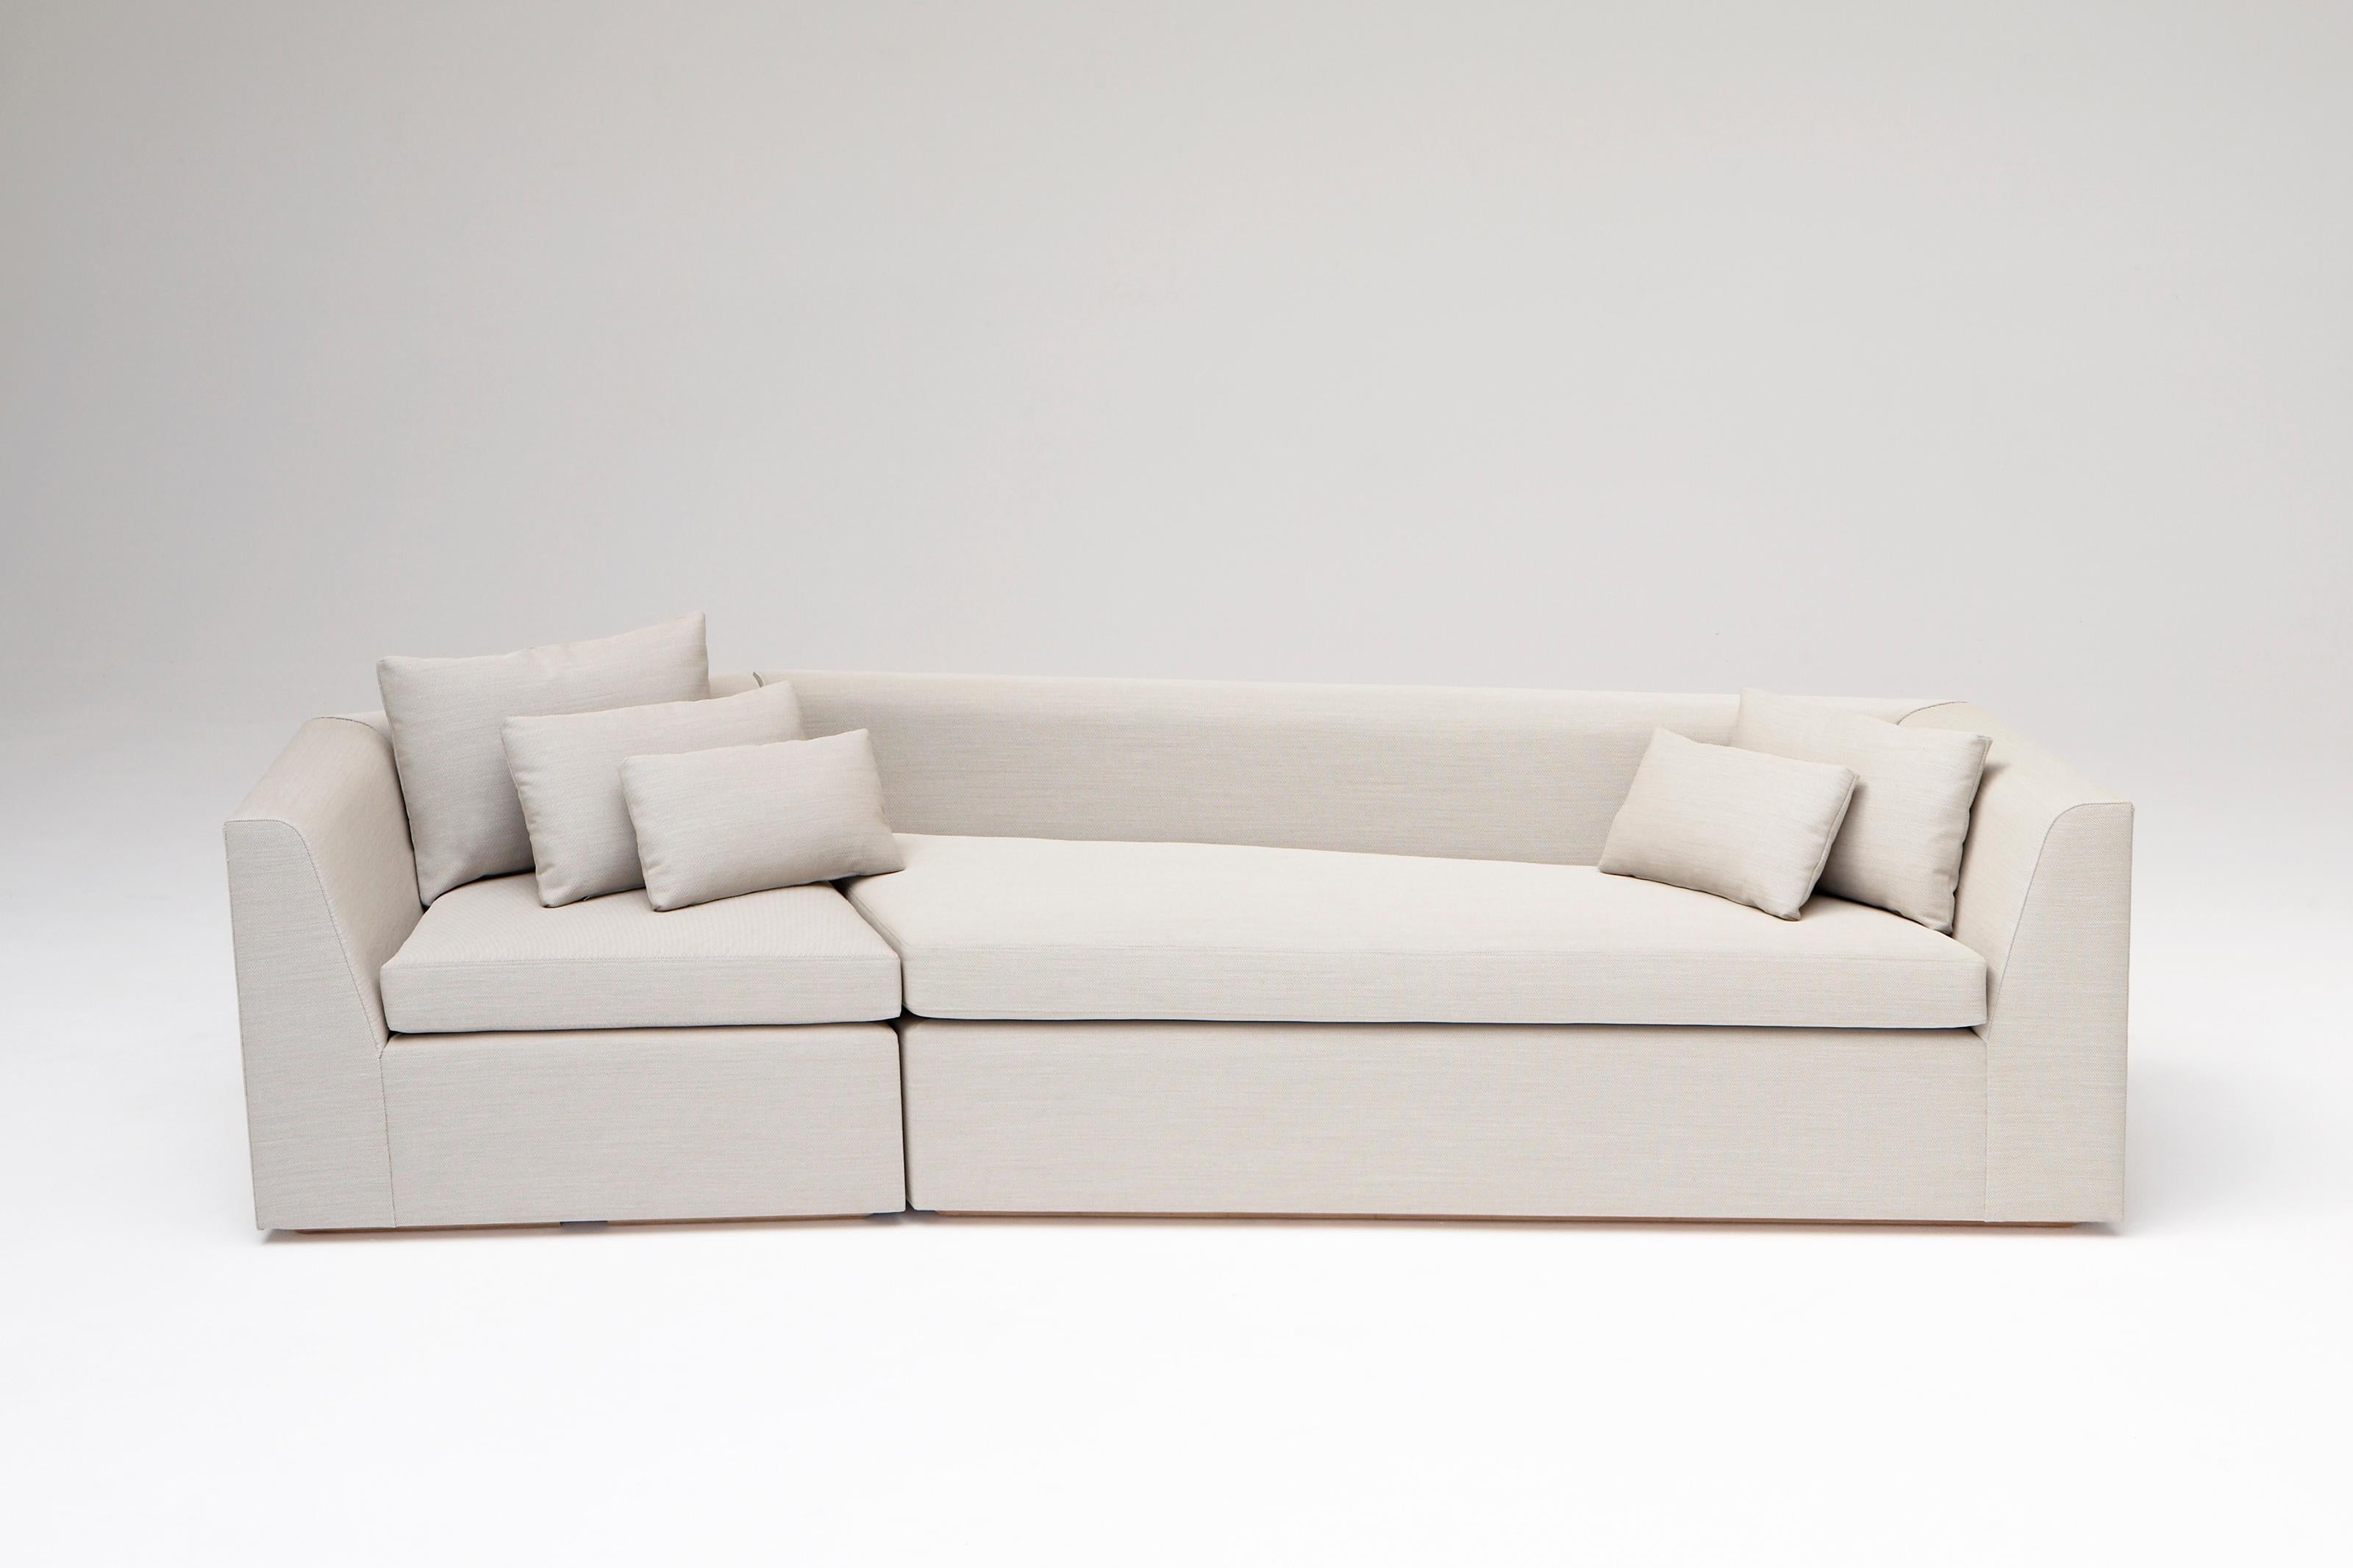 Pangaea Sofa by Phase Design
Dimensions: D 99.1 x W 274.3 x H 63.5 cm. 
Materials: Birch wood and upholstery. 

Hardwood construction with upholstered body and birch base. Upholstery may be sourced in the Customer's Own Material (COM), the